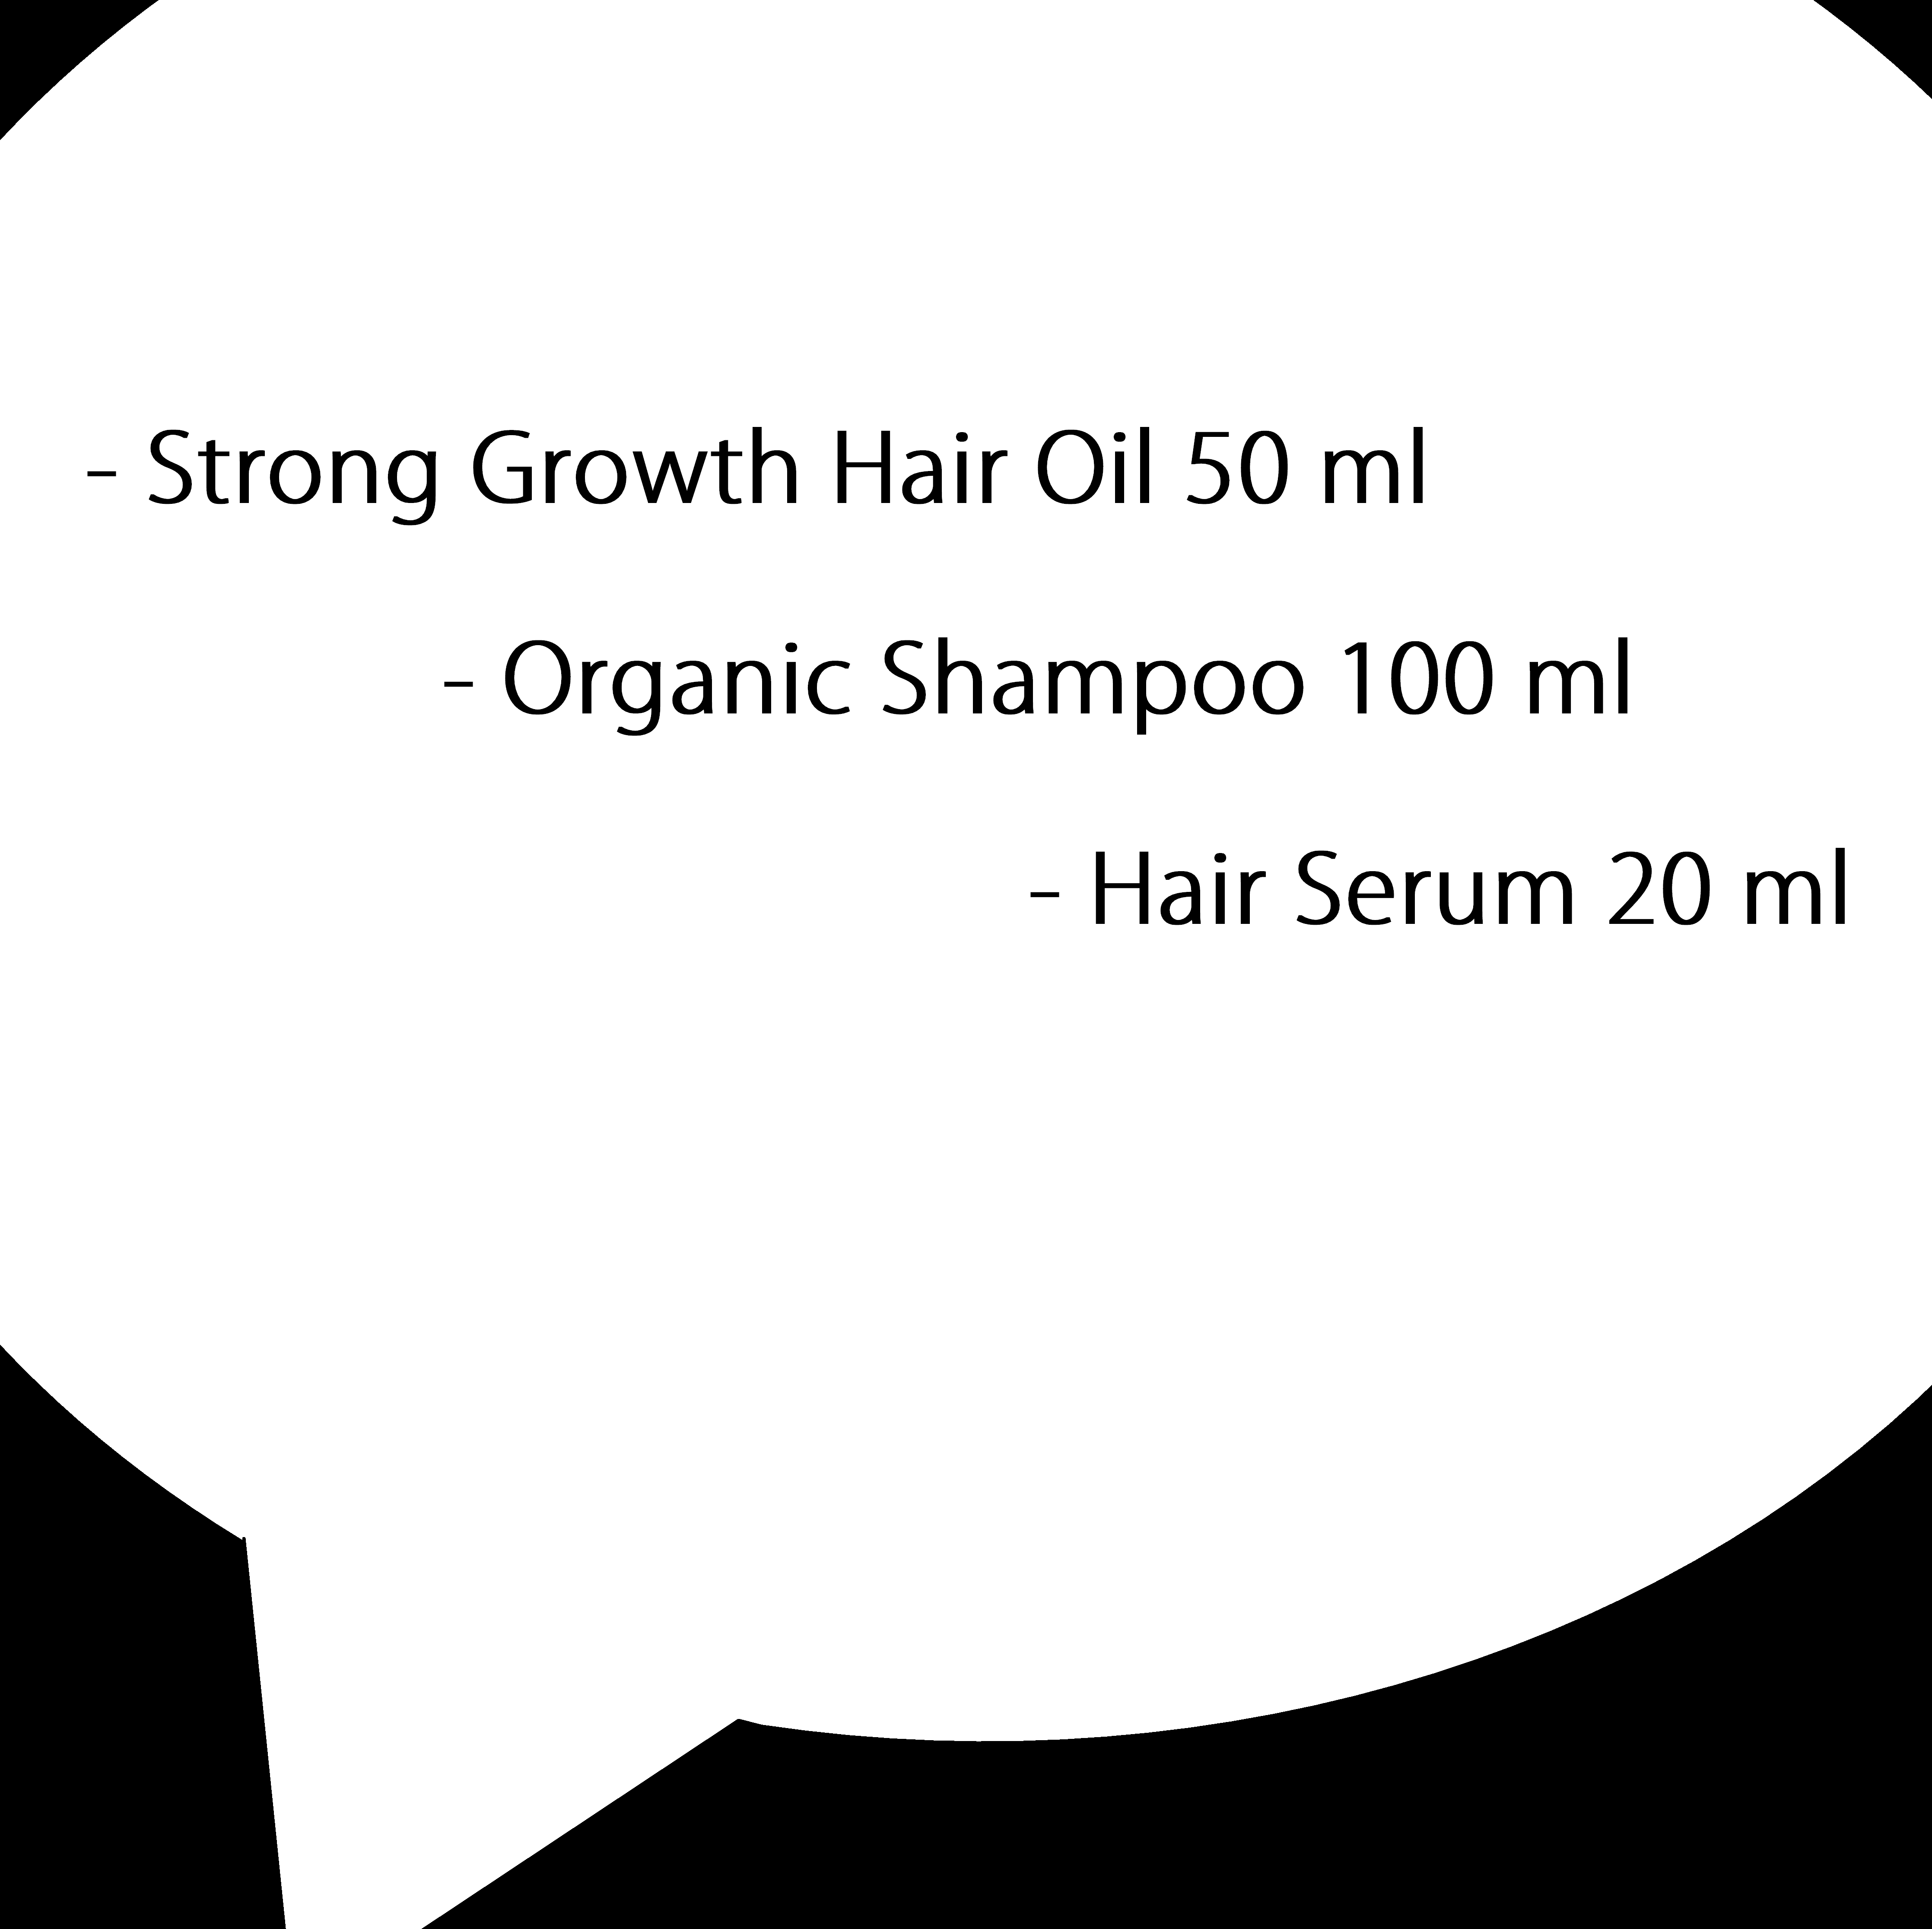 HAIR CARE - LOWEST PRICE DEAL